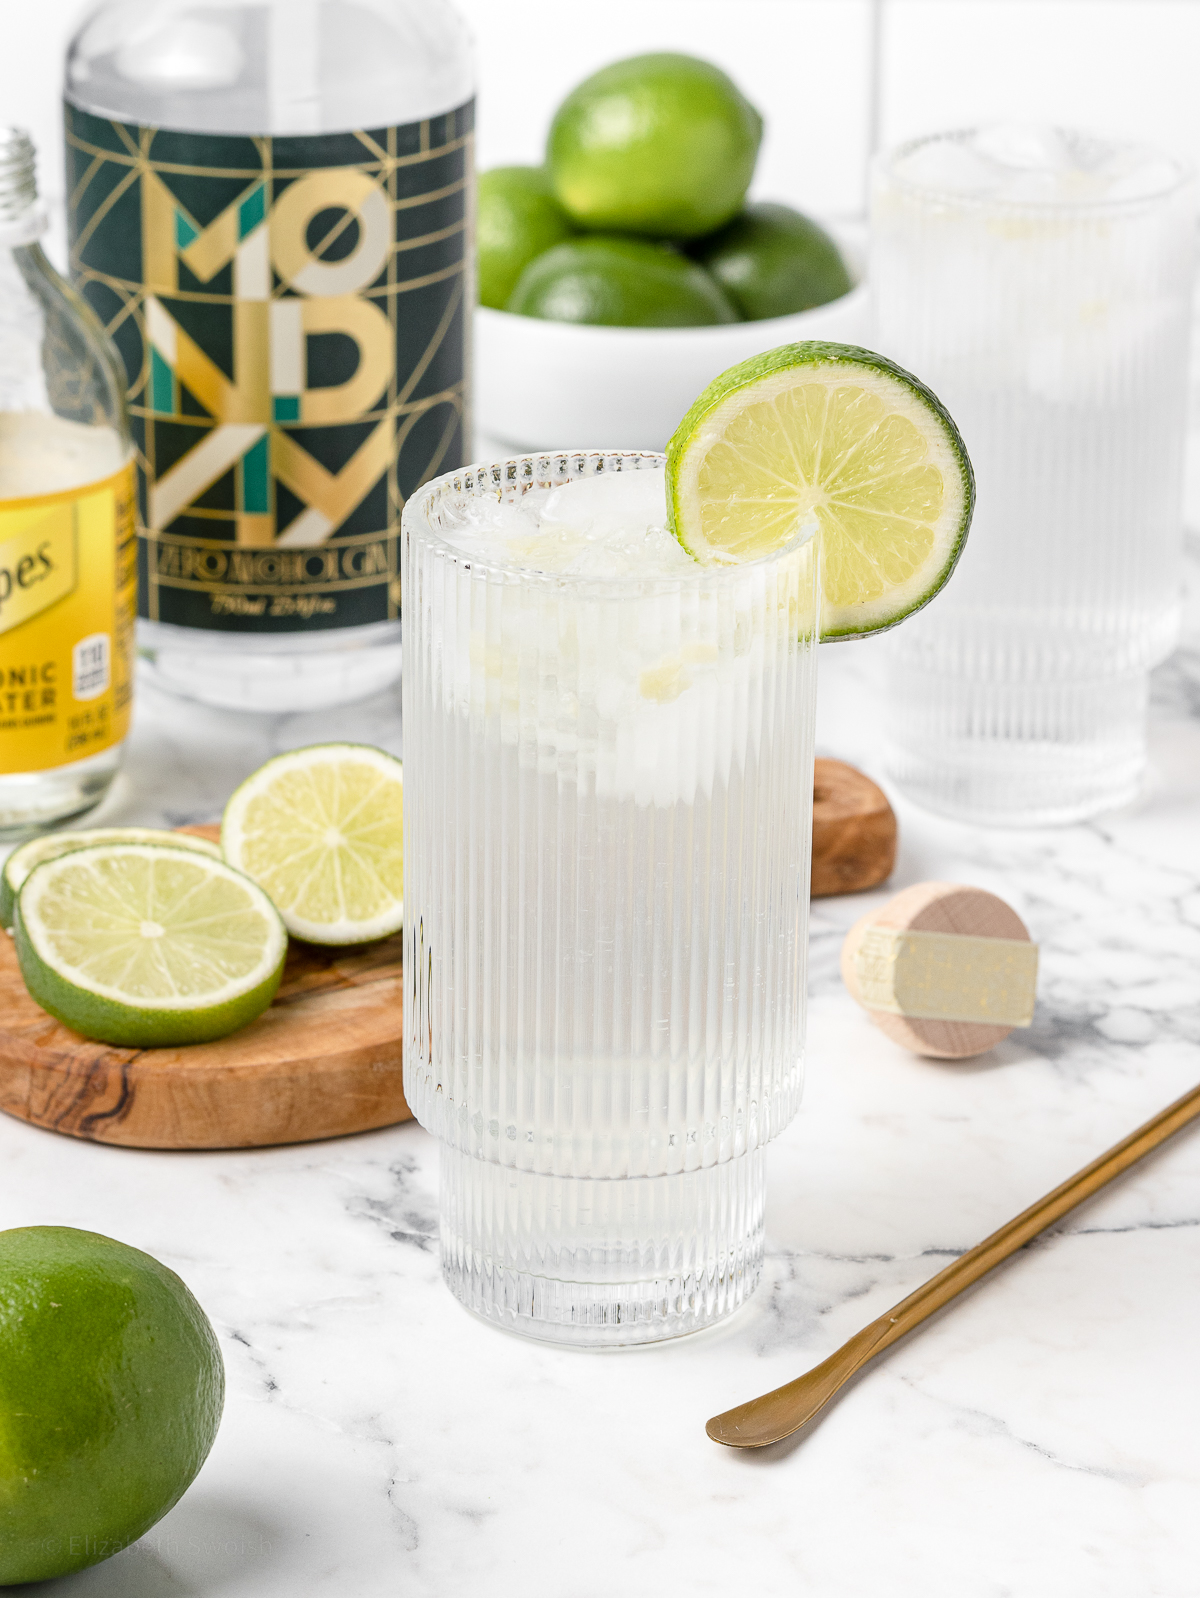 Gin and Tonic Mocktail in a highball glass with lime slice garnish. More limes and lime slices on the side. Non alcoholic gin, tonic water, and a stirrer in the background.